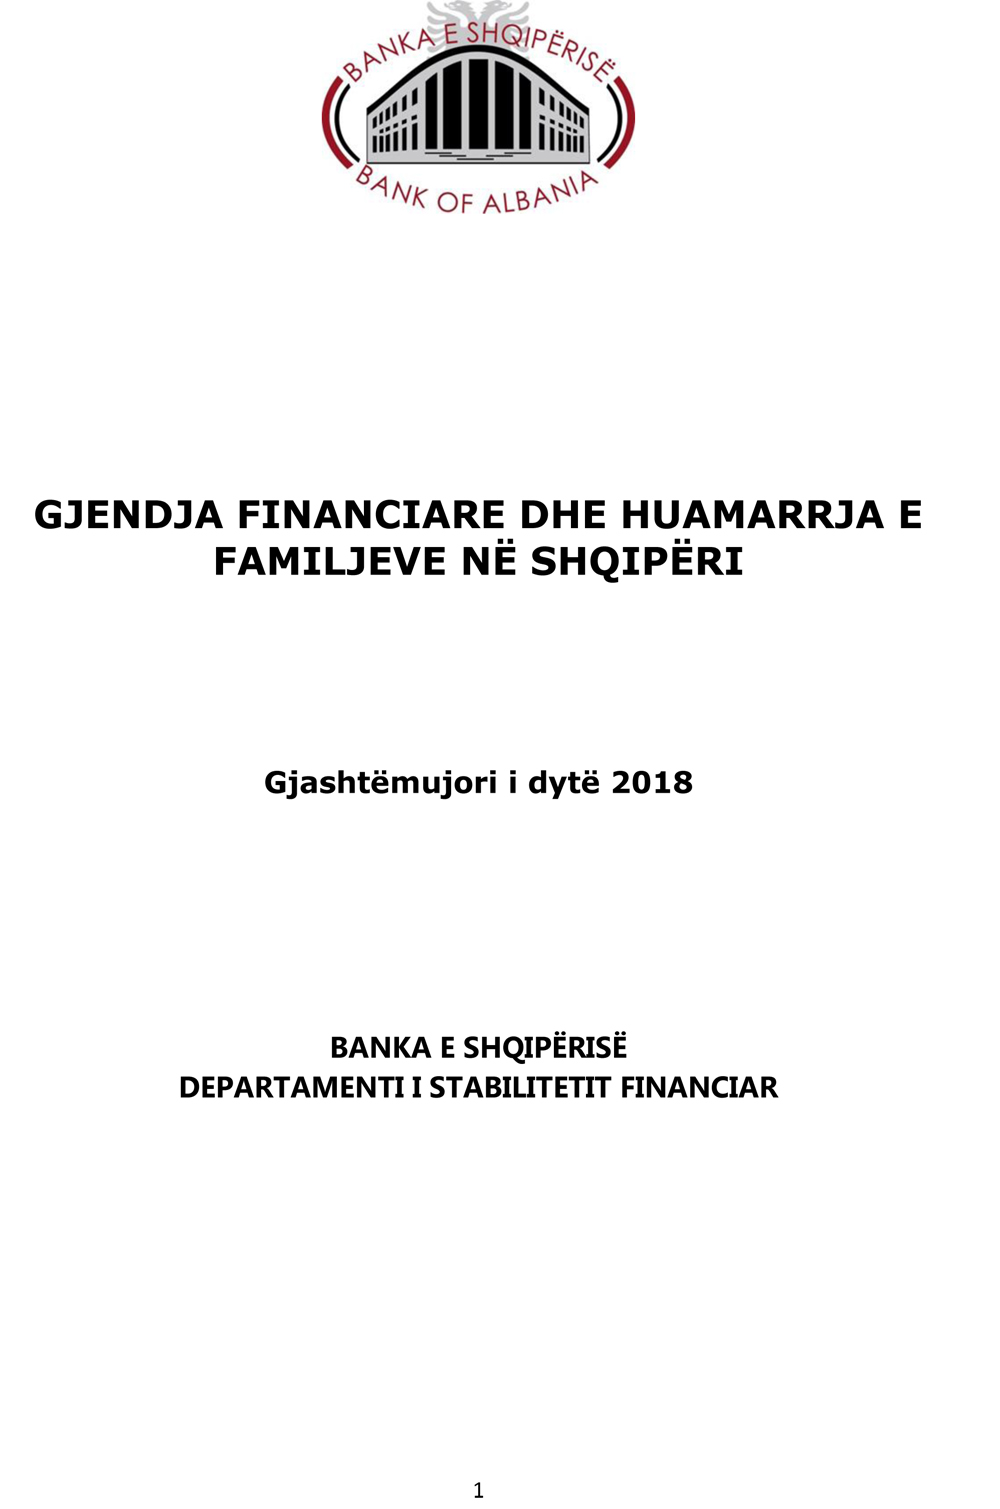 Survey on Financial Situation and Borrowing of Households in Albania - 2018 H2